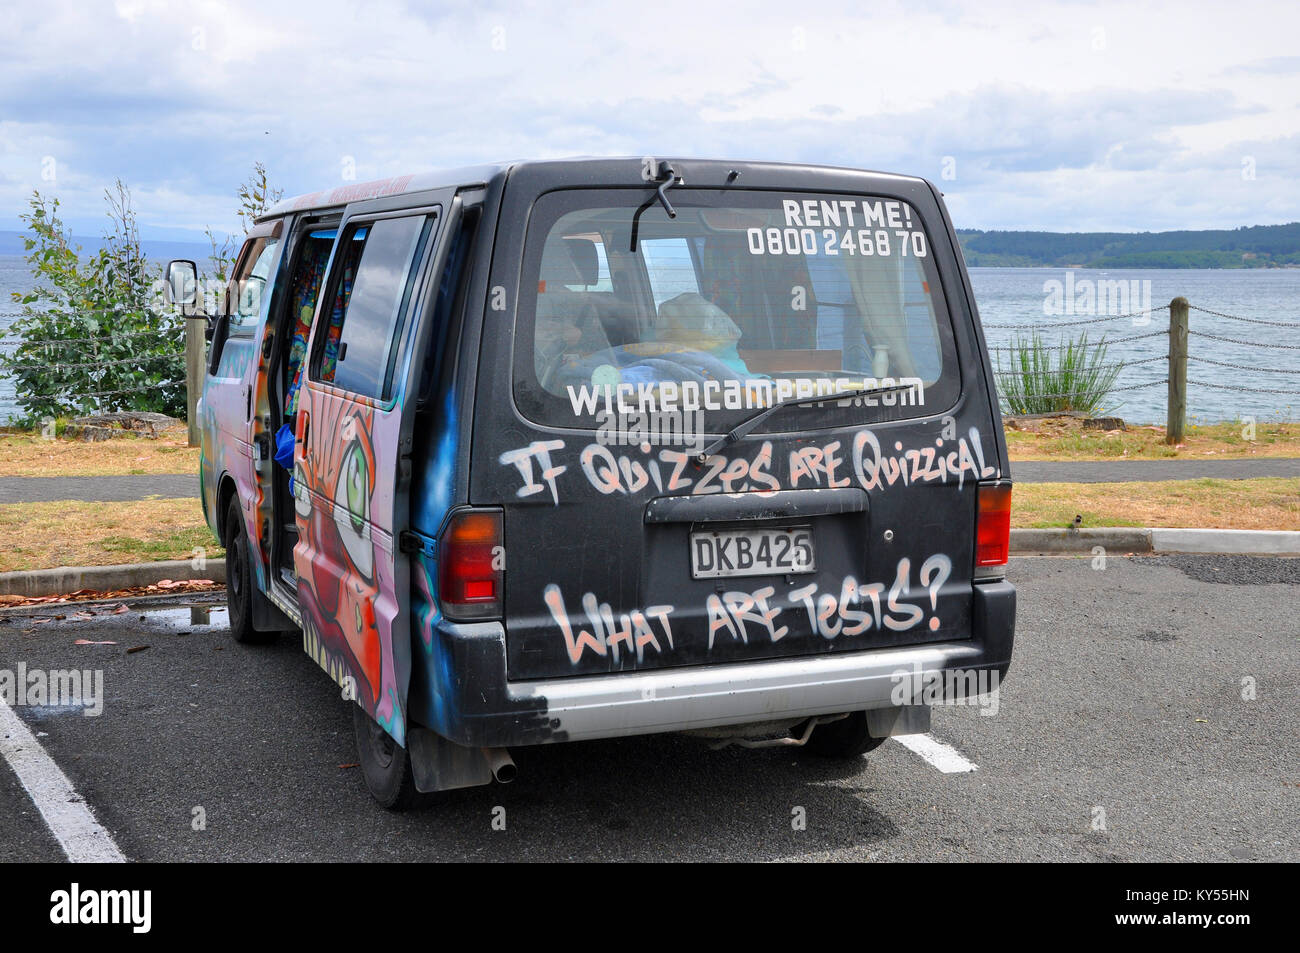 Wicked Campervan hire in New Zealand operate graffiti covered camper vans and motorhomes. Comic slogan. Lake Taupo Photo - Alamy